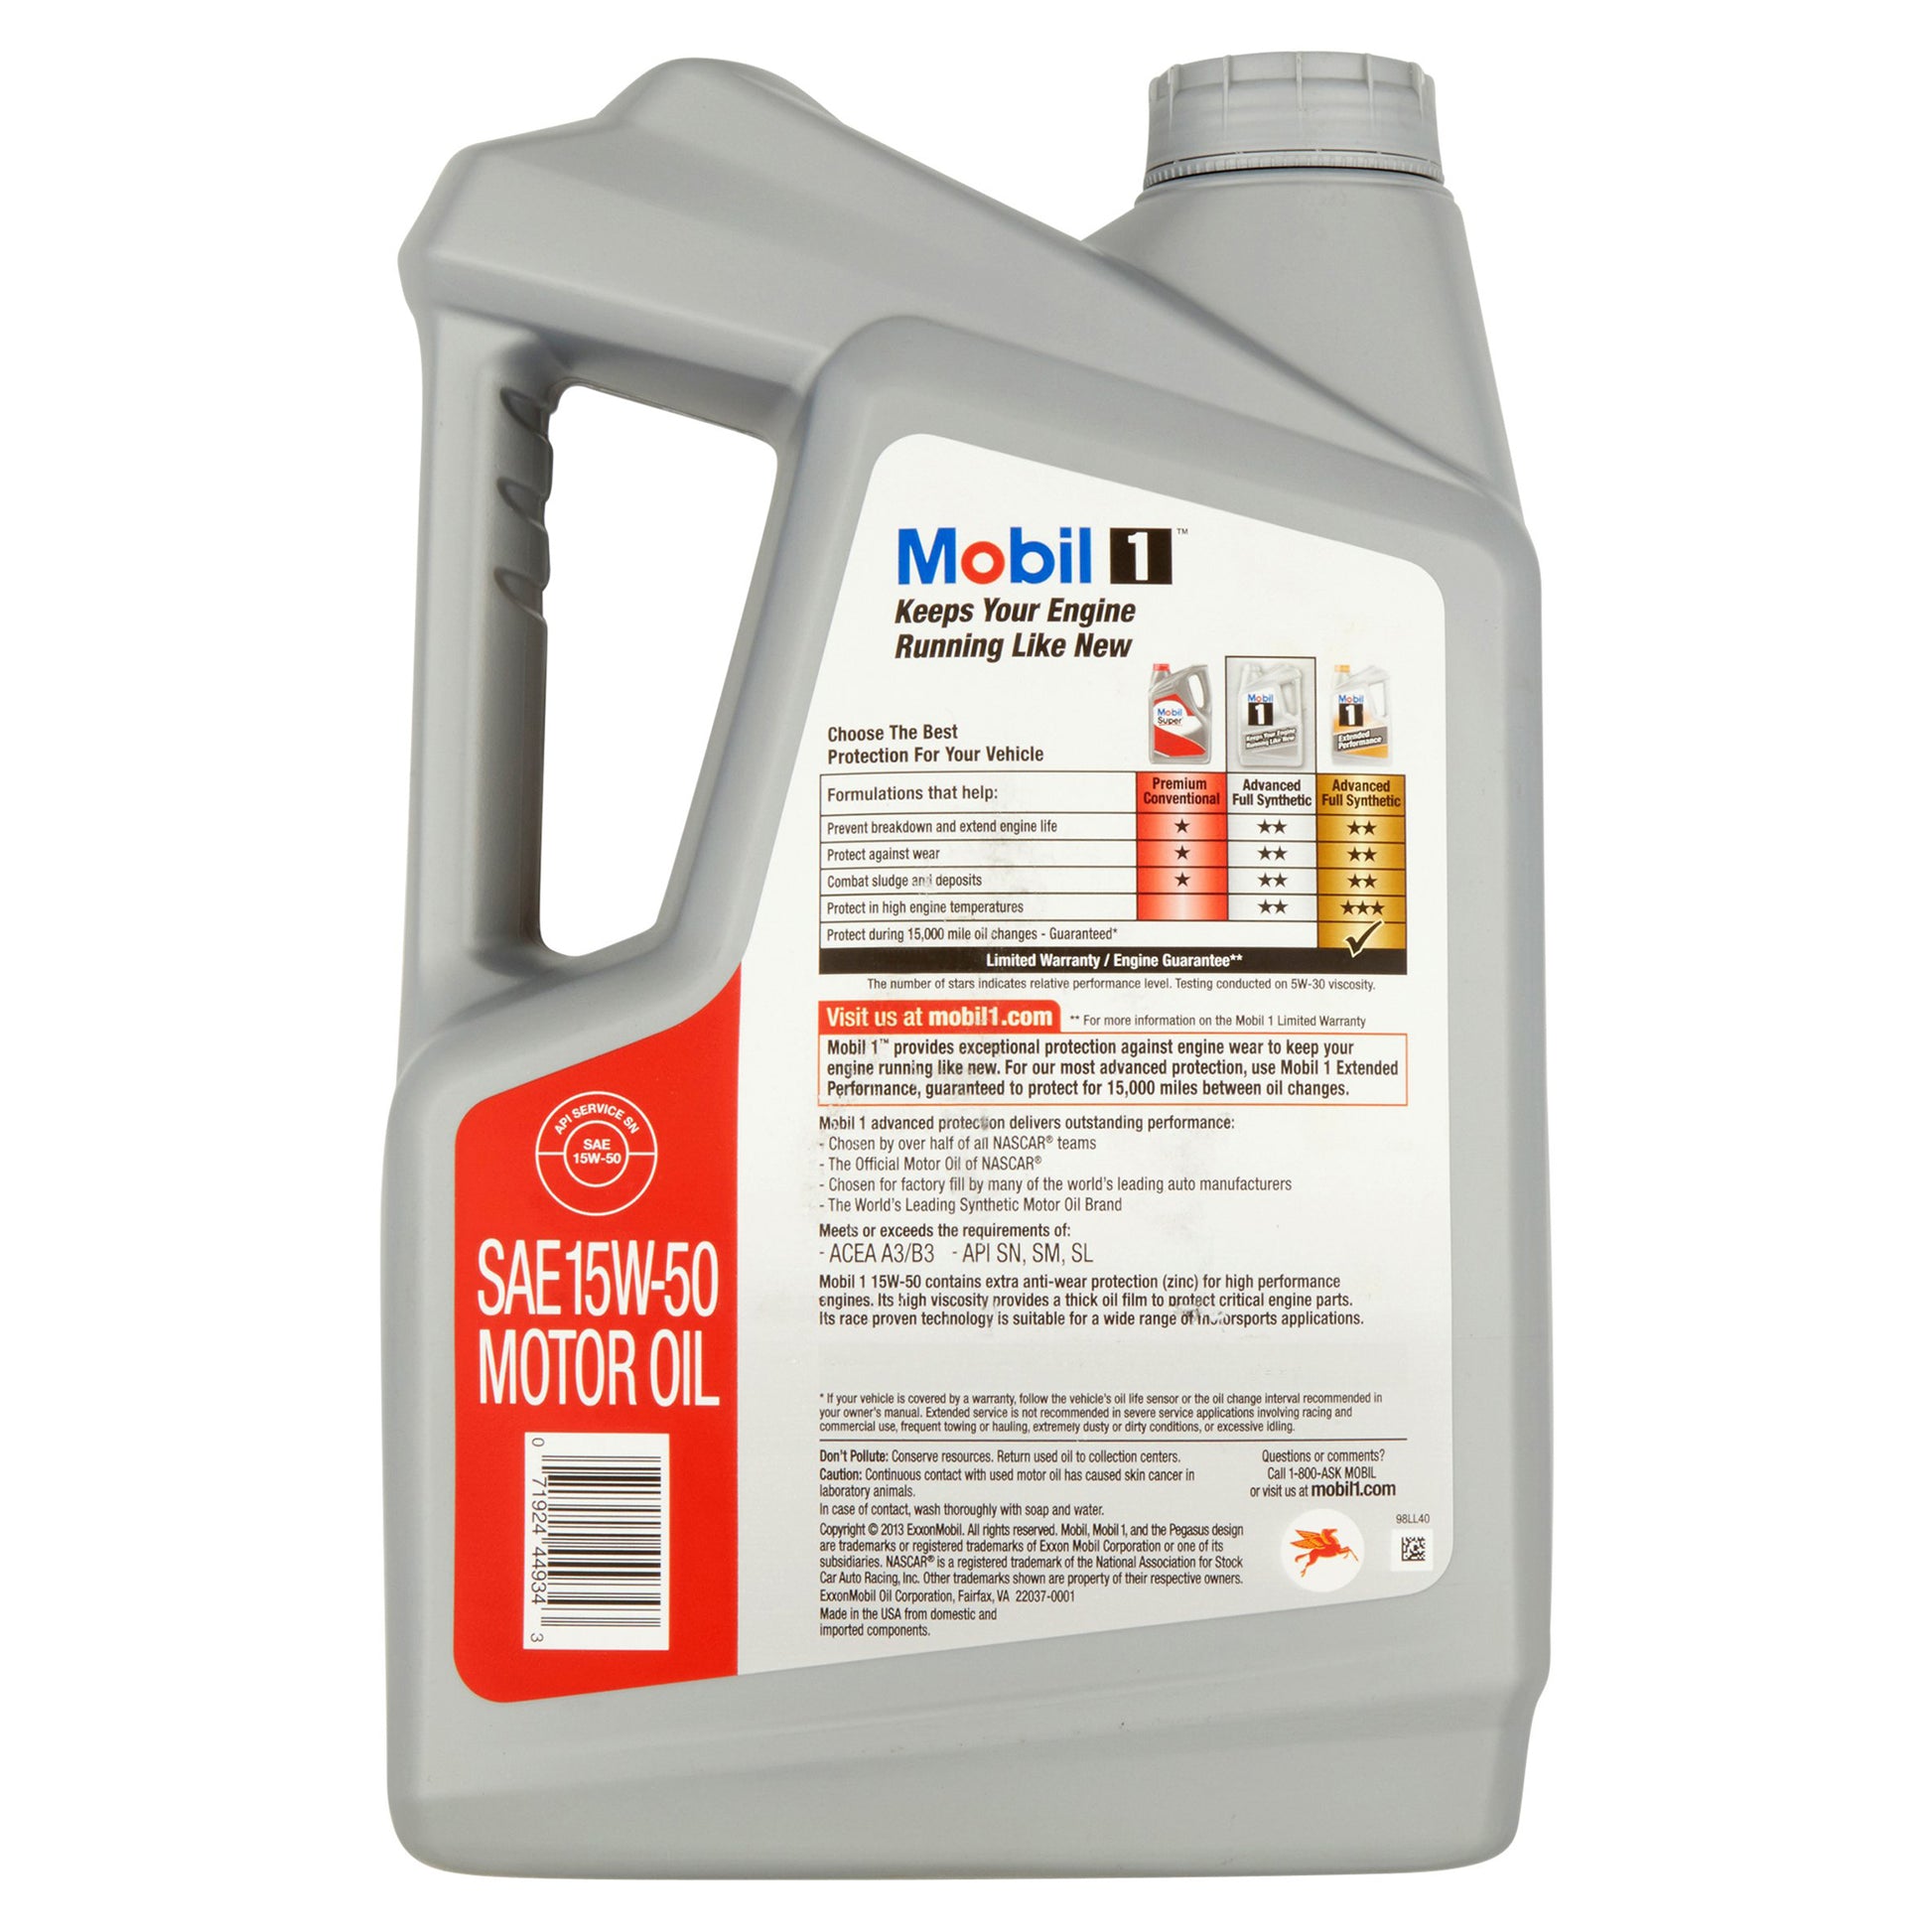 Mobil 1 15W-50 Advanced Fully Synthetic Motor Oil 5 Quarts